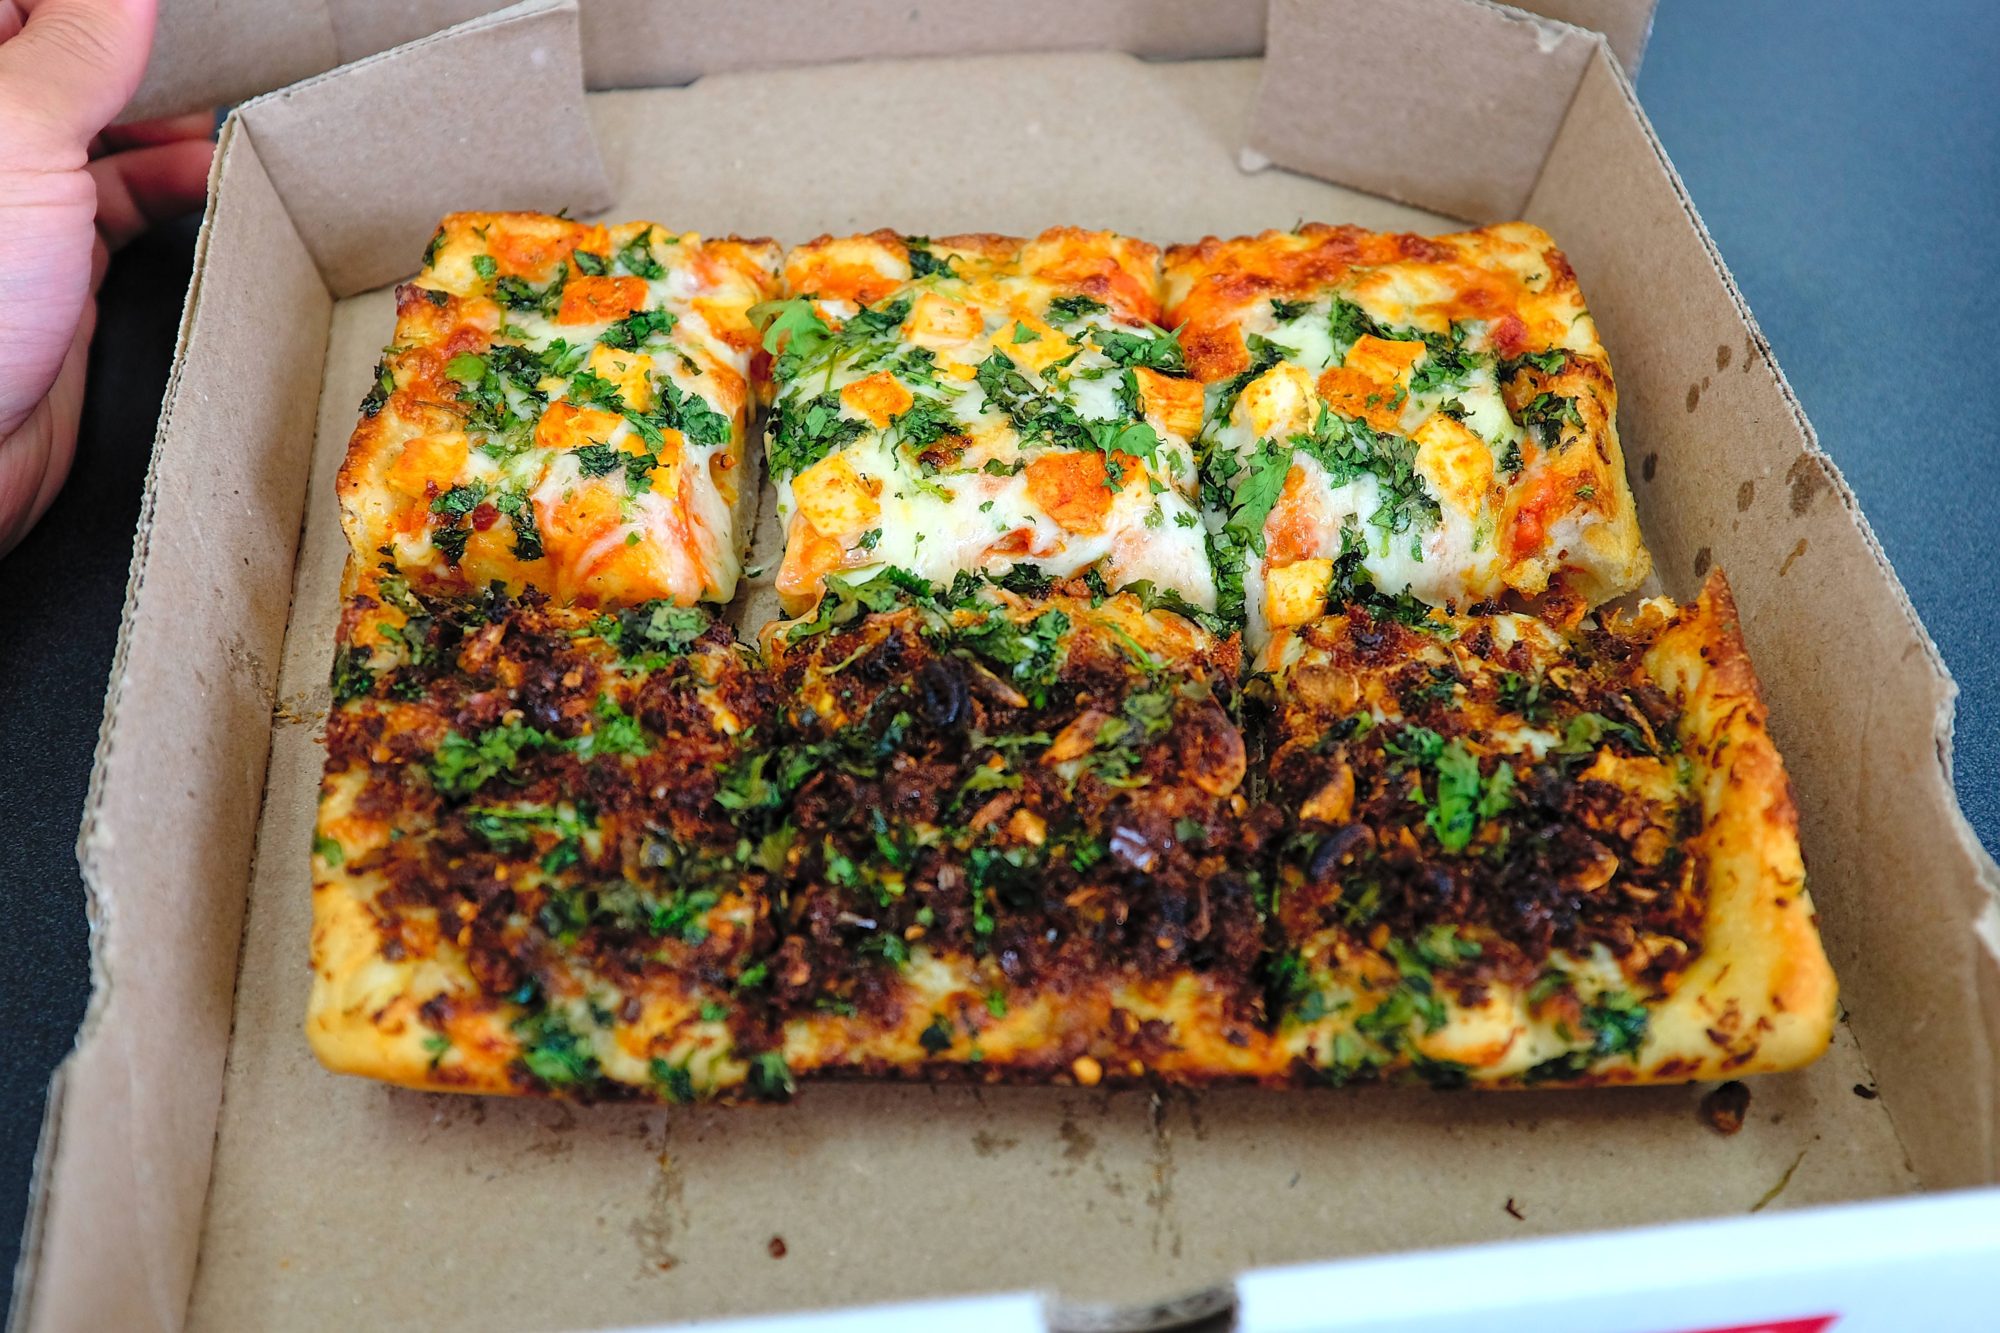 A Detroit pizza with two types of toppings